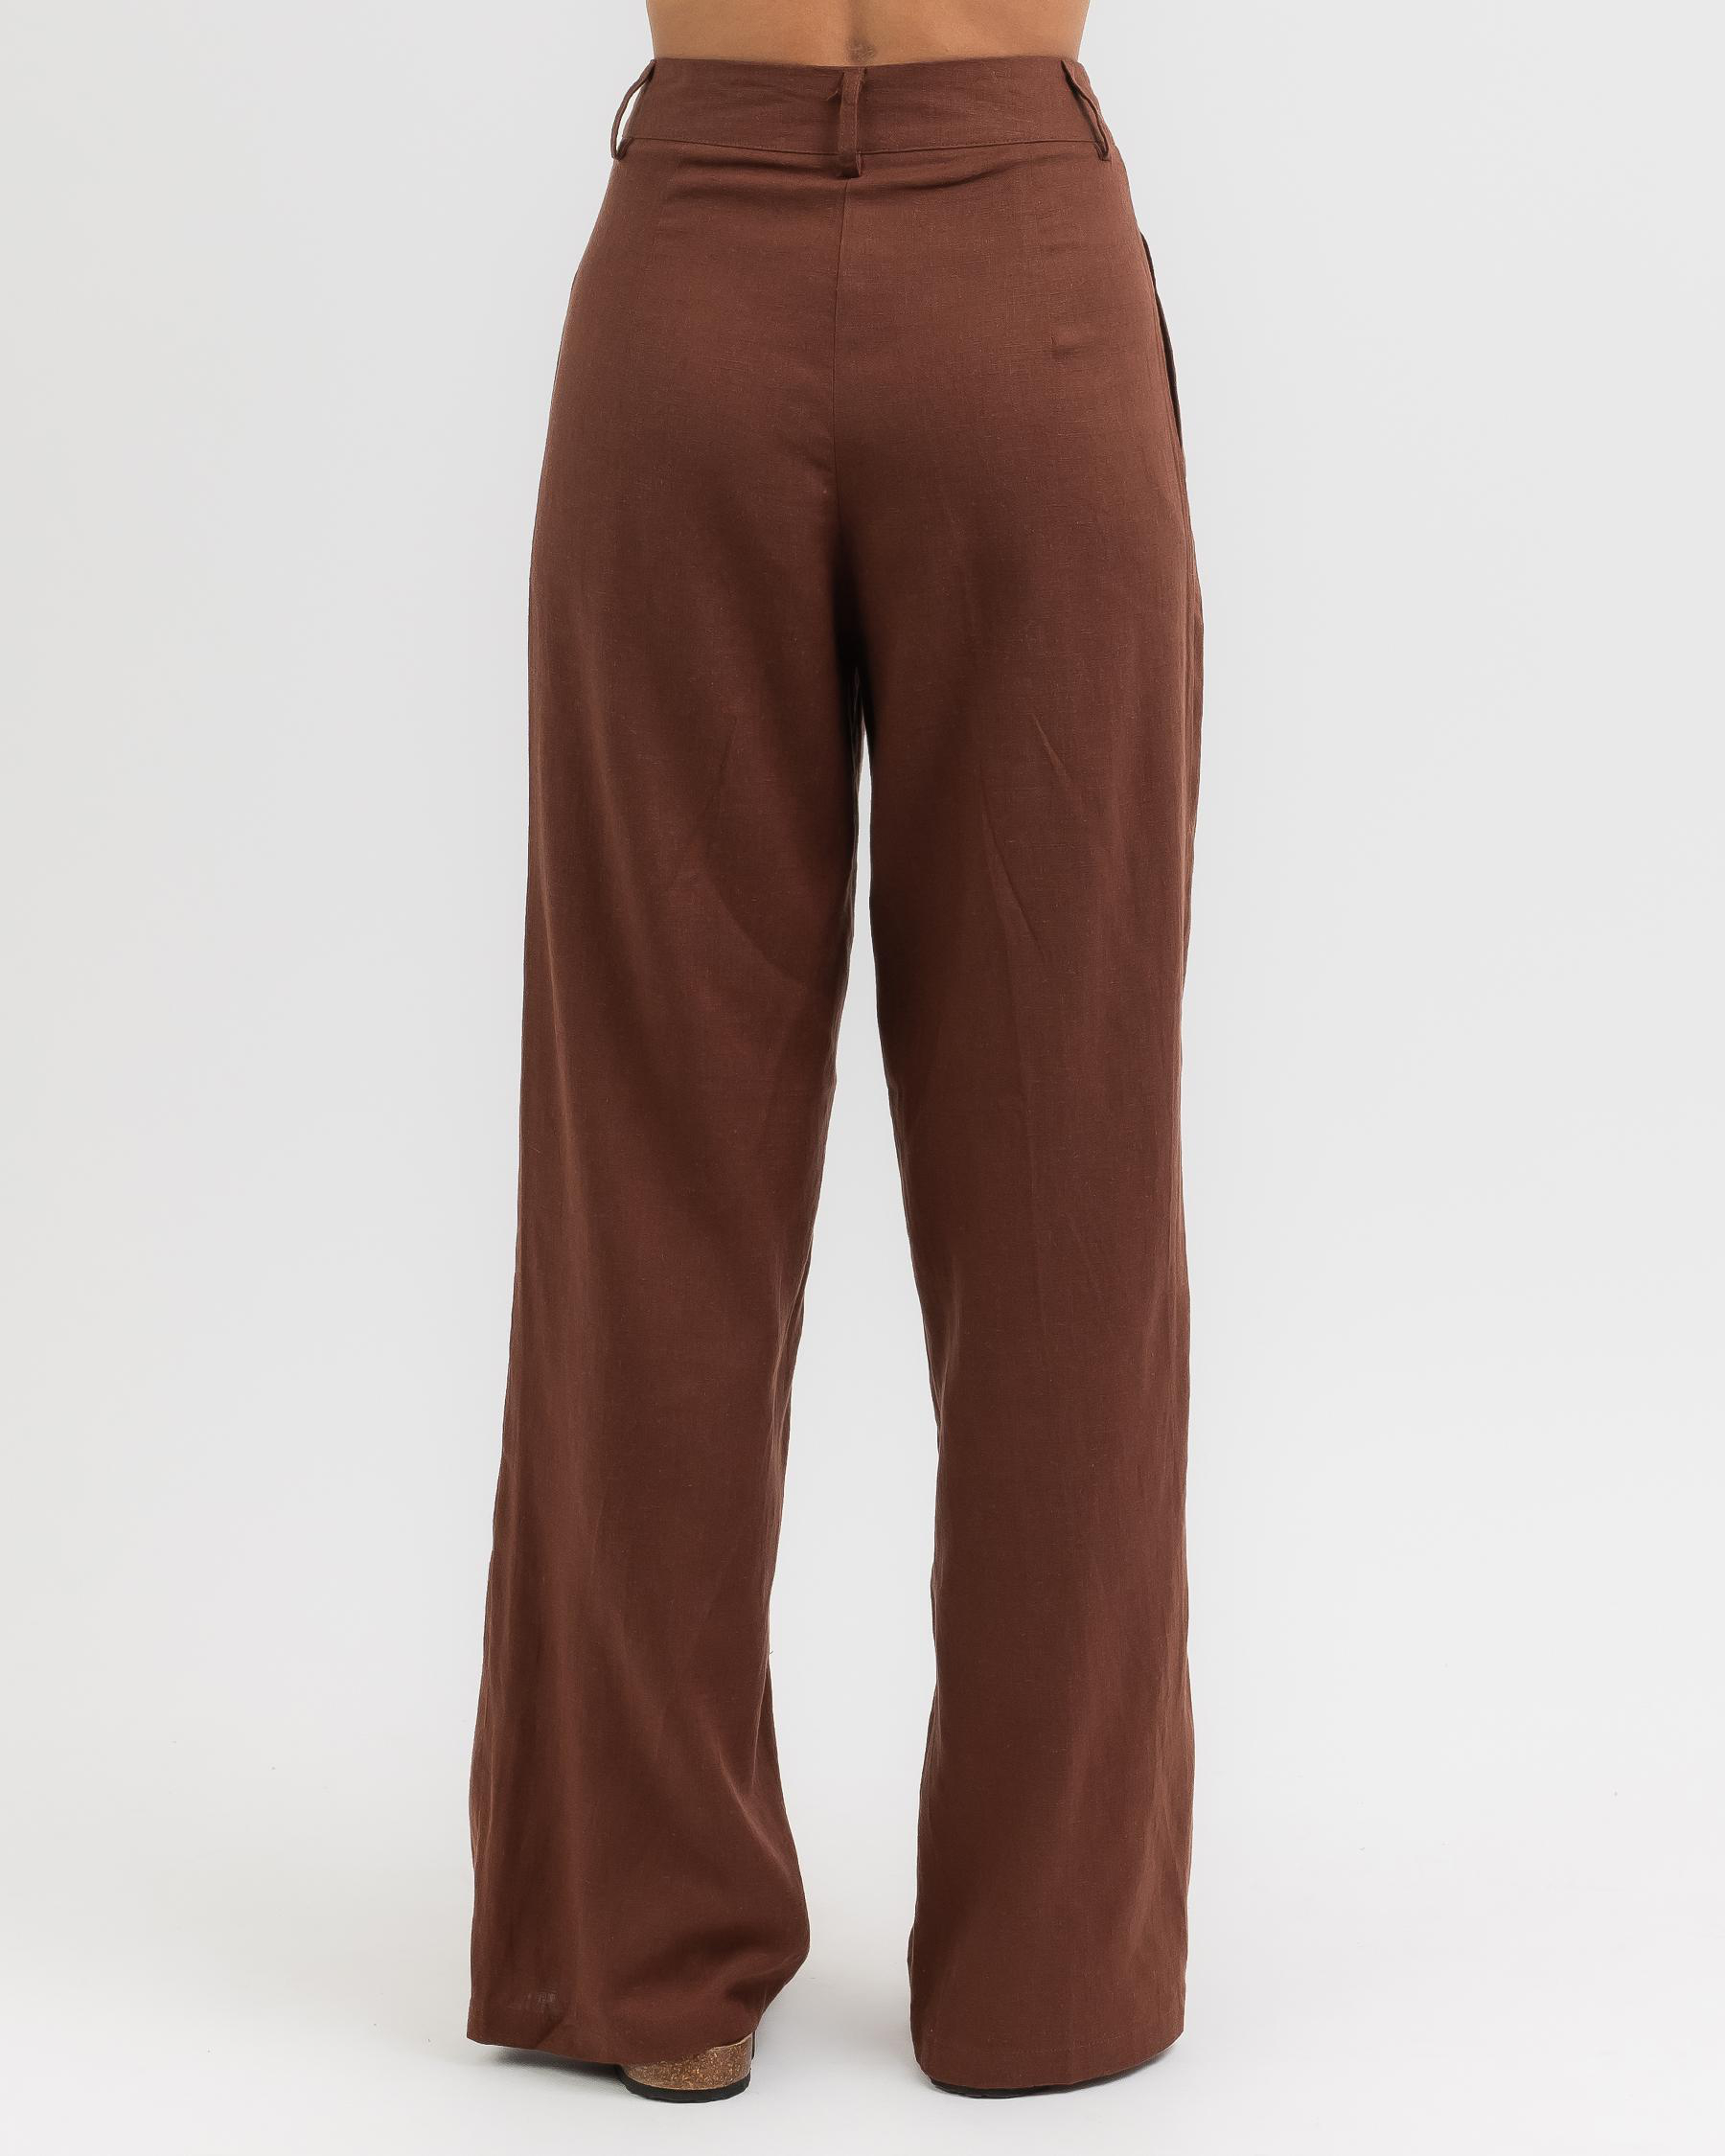 Shop Womens Beach Pants Online - FREE* Shipping & Easy Returns - City Beach  United States